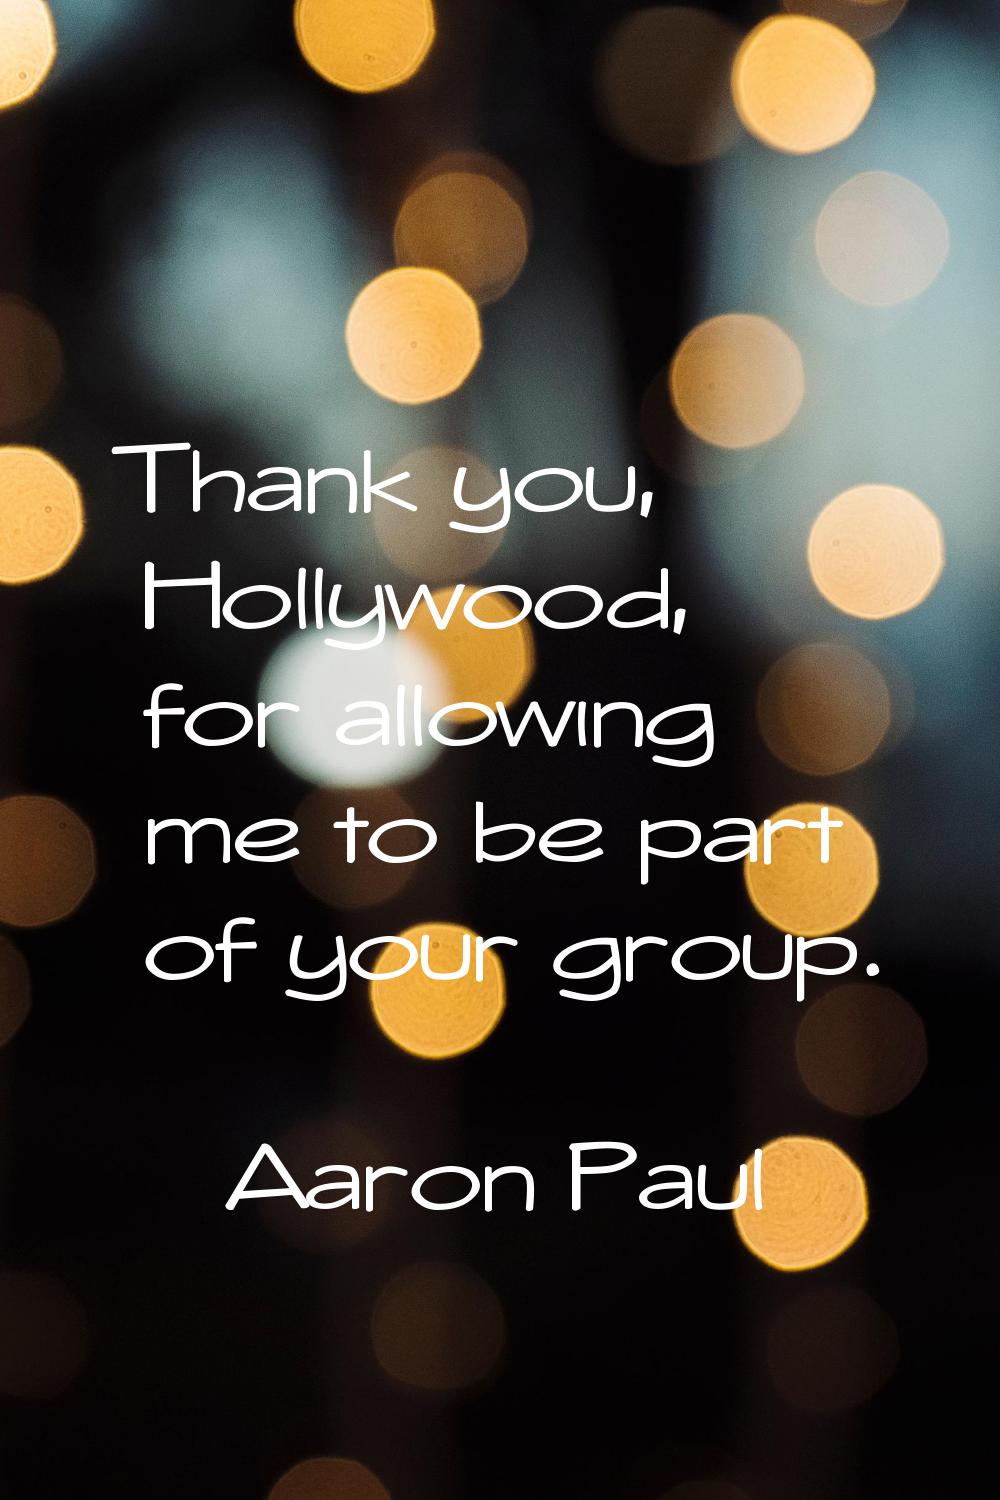 Thank you, Hollywood, for allowing me to be part of your group.